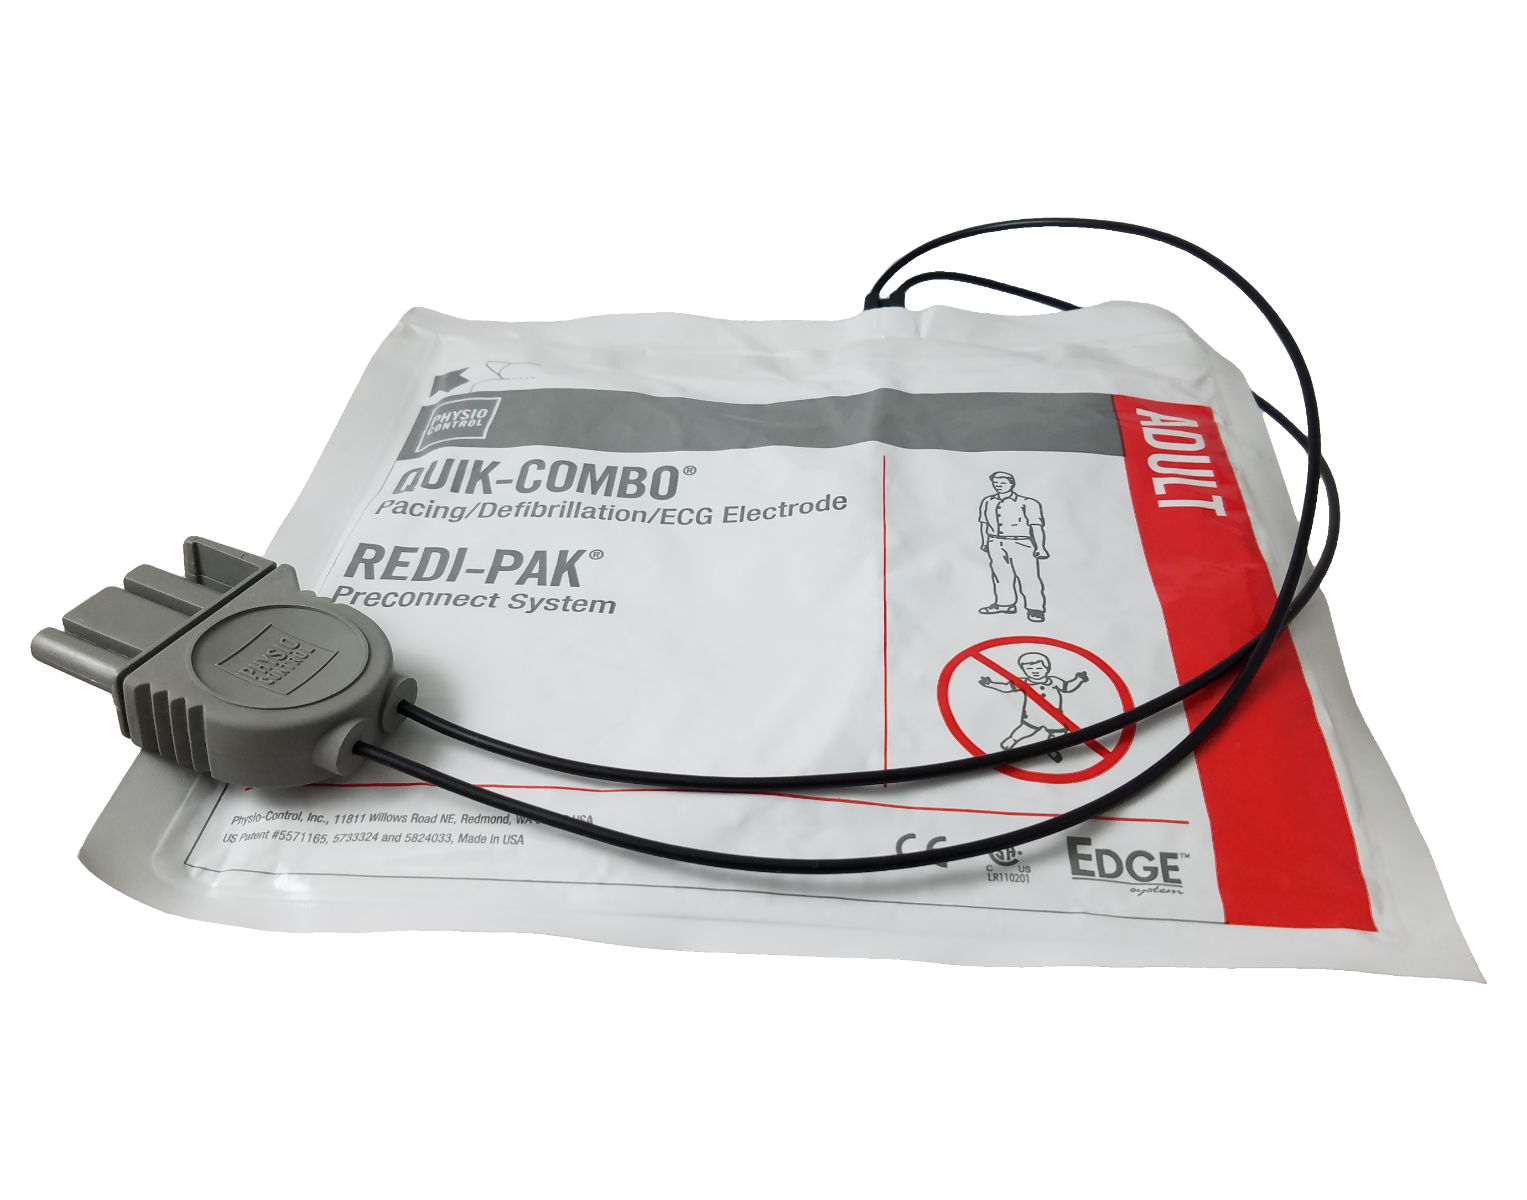 EDGE System Electrodes with QUIK-COMBO Connector and REDI-PAK Preconnect System